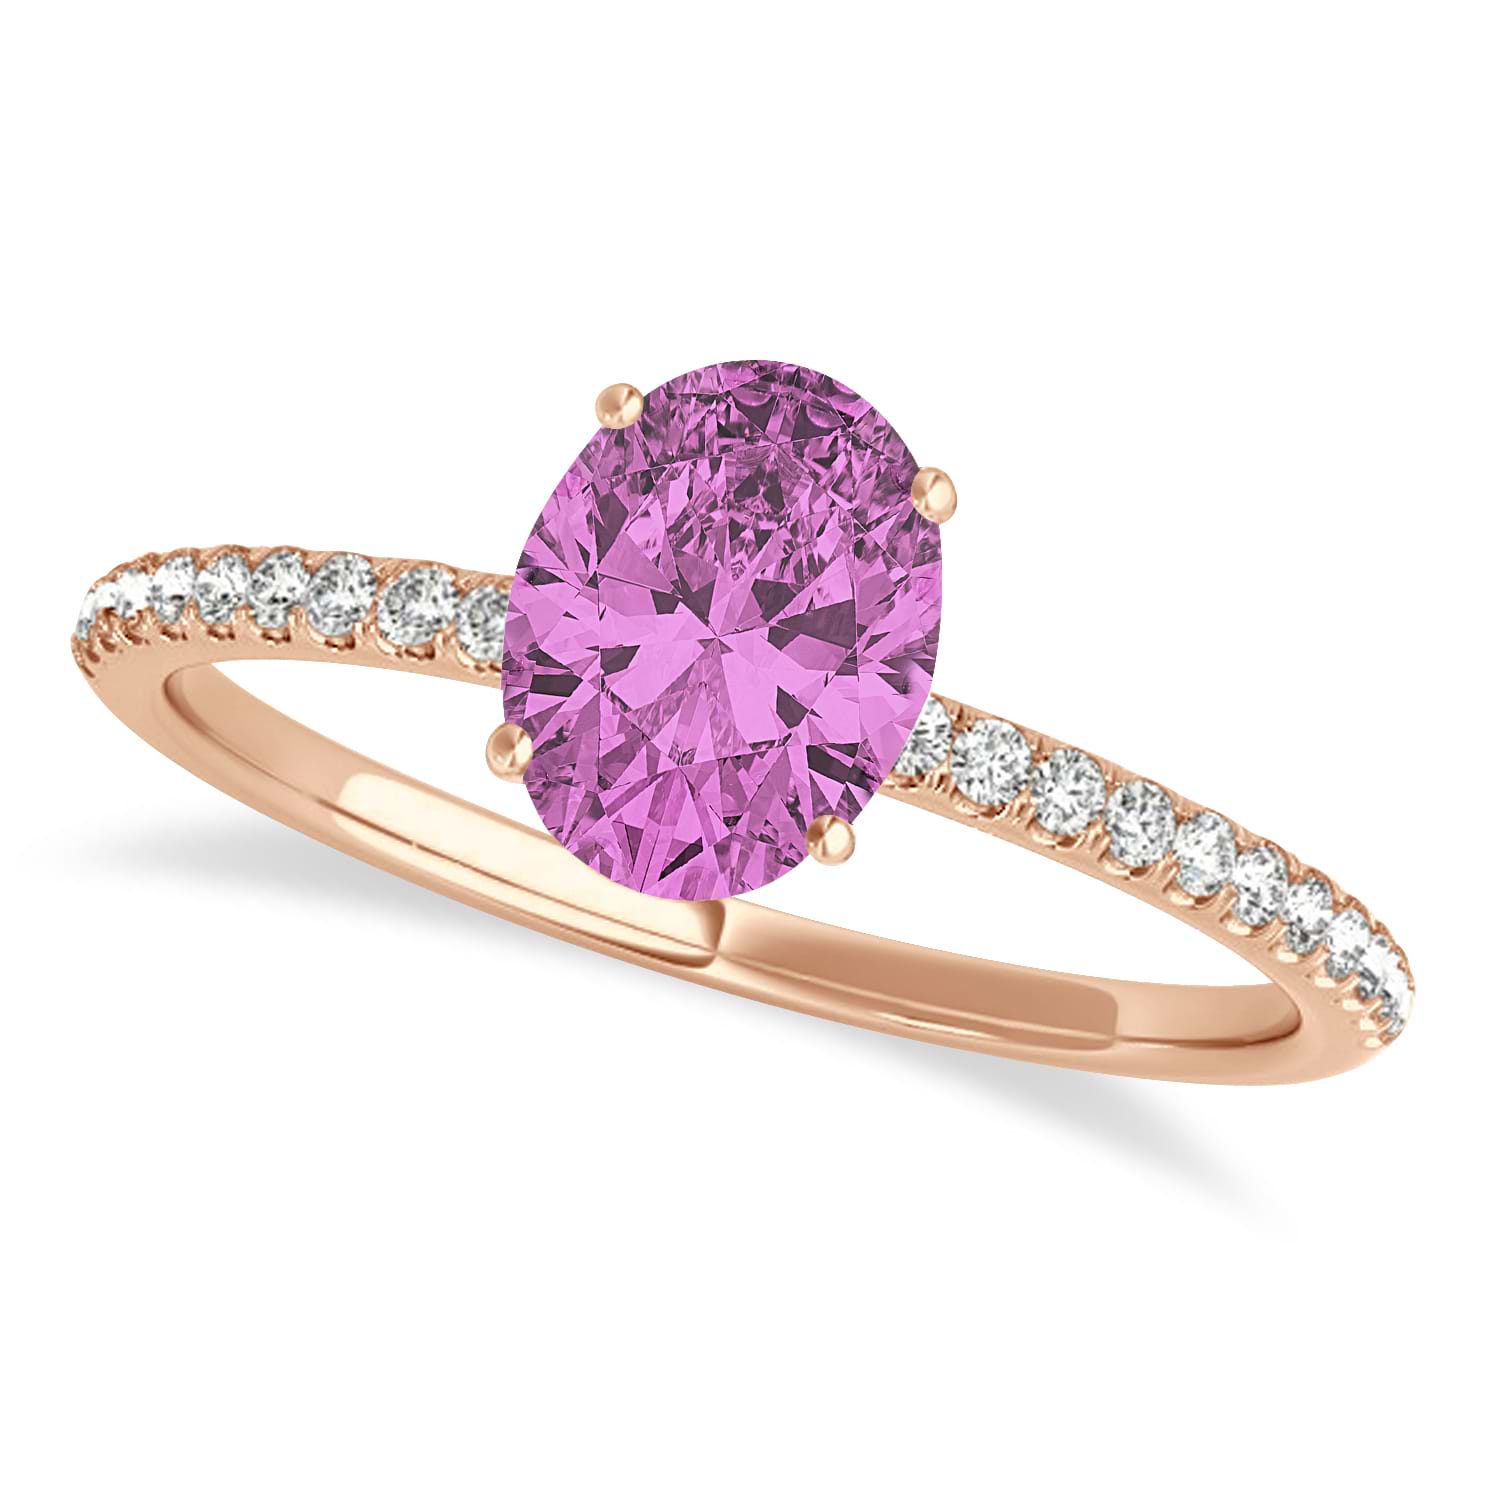 Pink Sapphire & Diamond Accented Oval Shape Engagement Ring 14k Rose Gold (2.50ct)